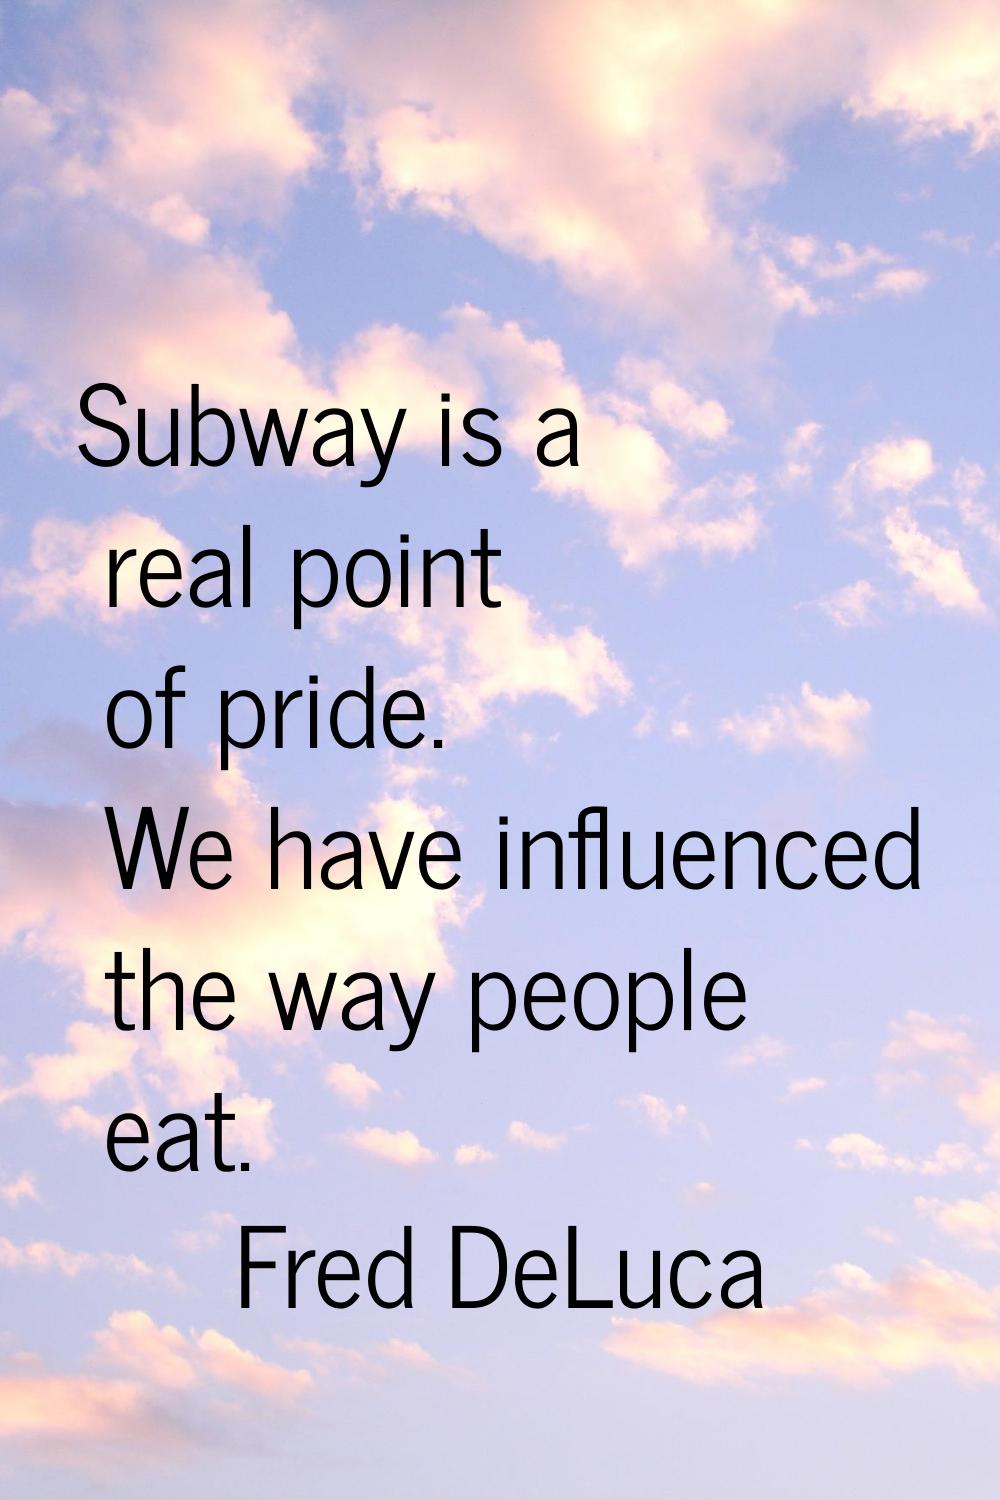 Subway is a real point of pride. We have influenced the way people eat.